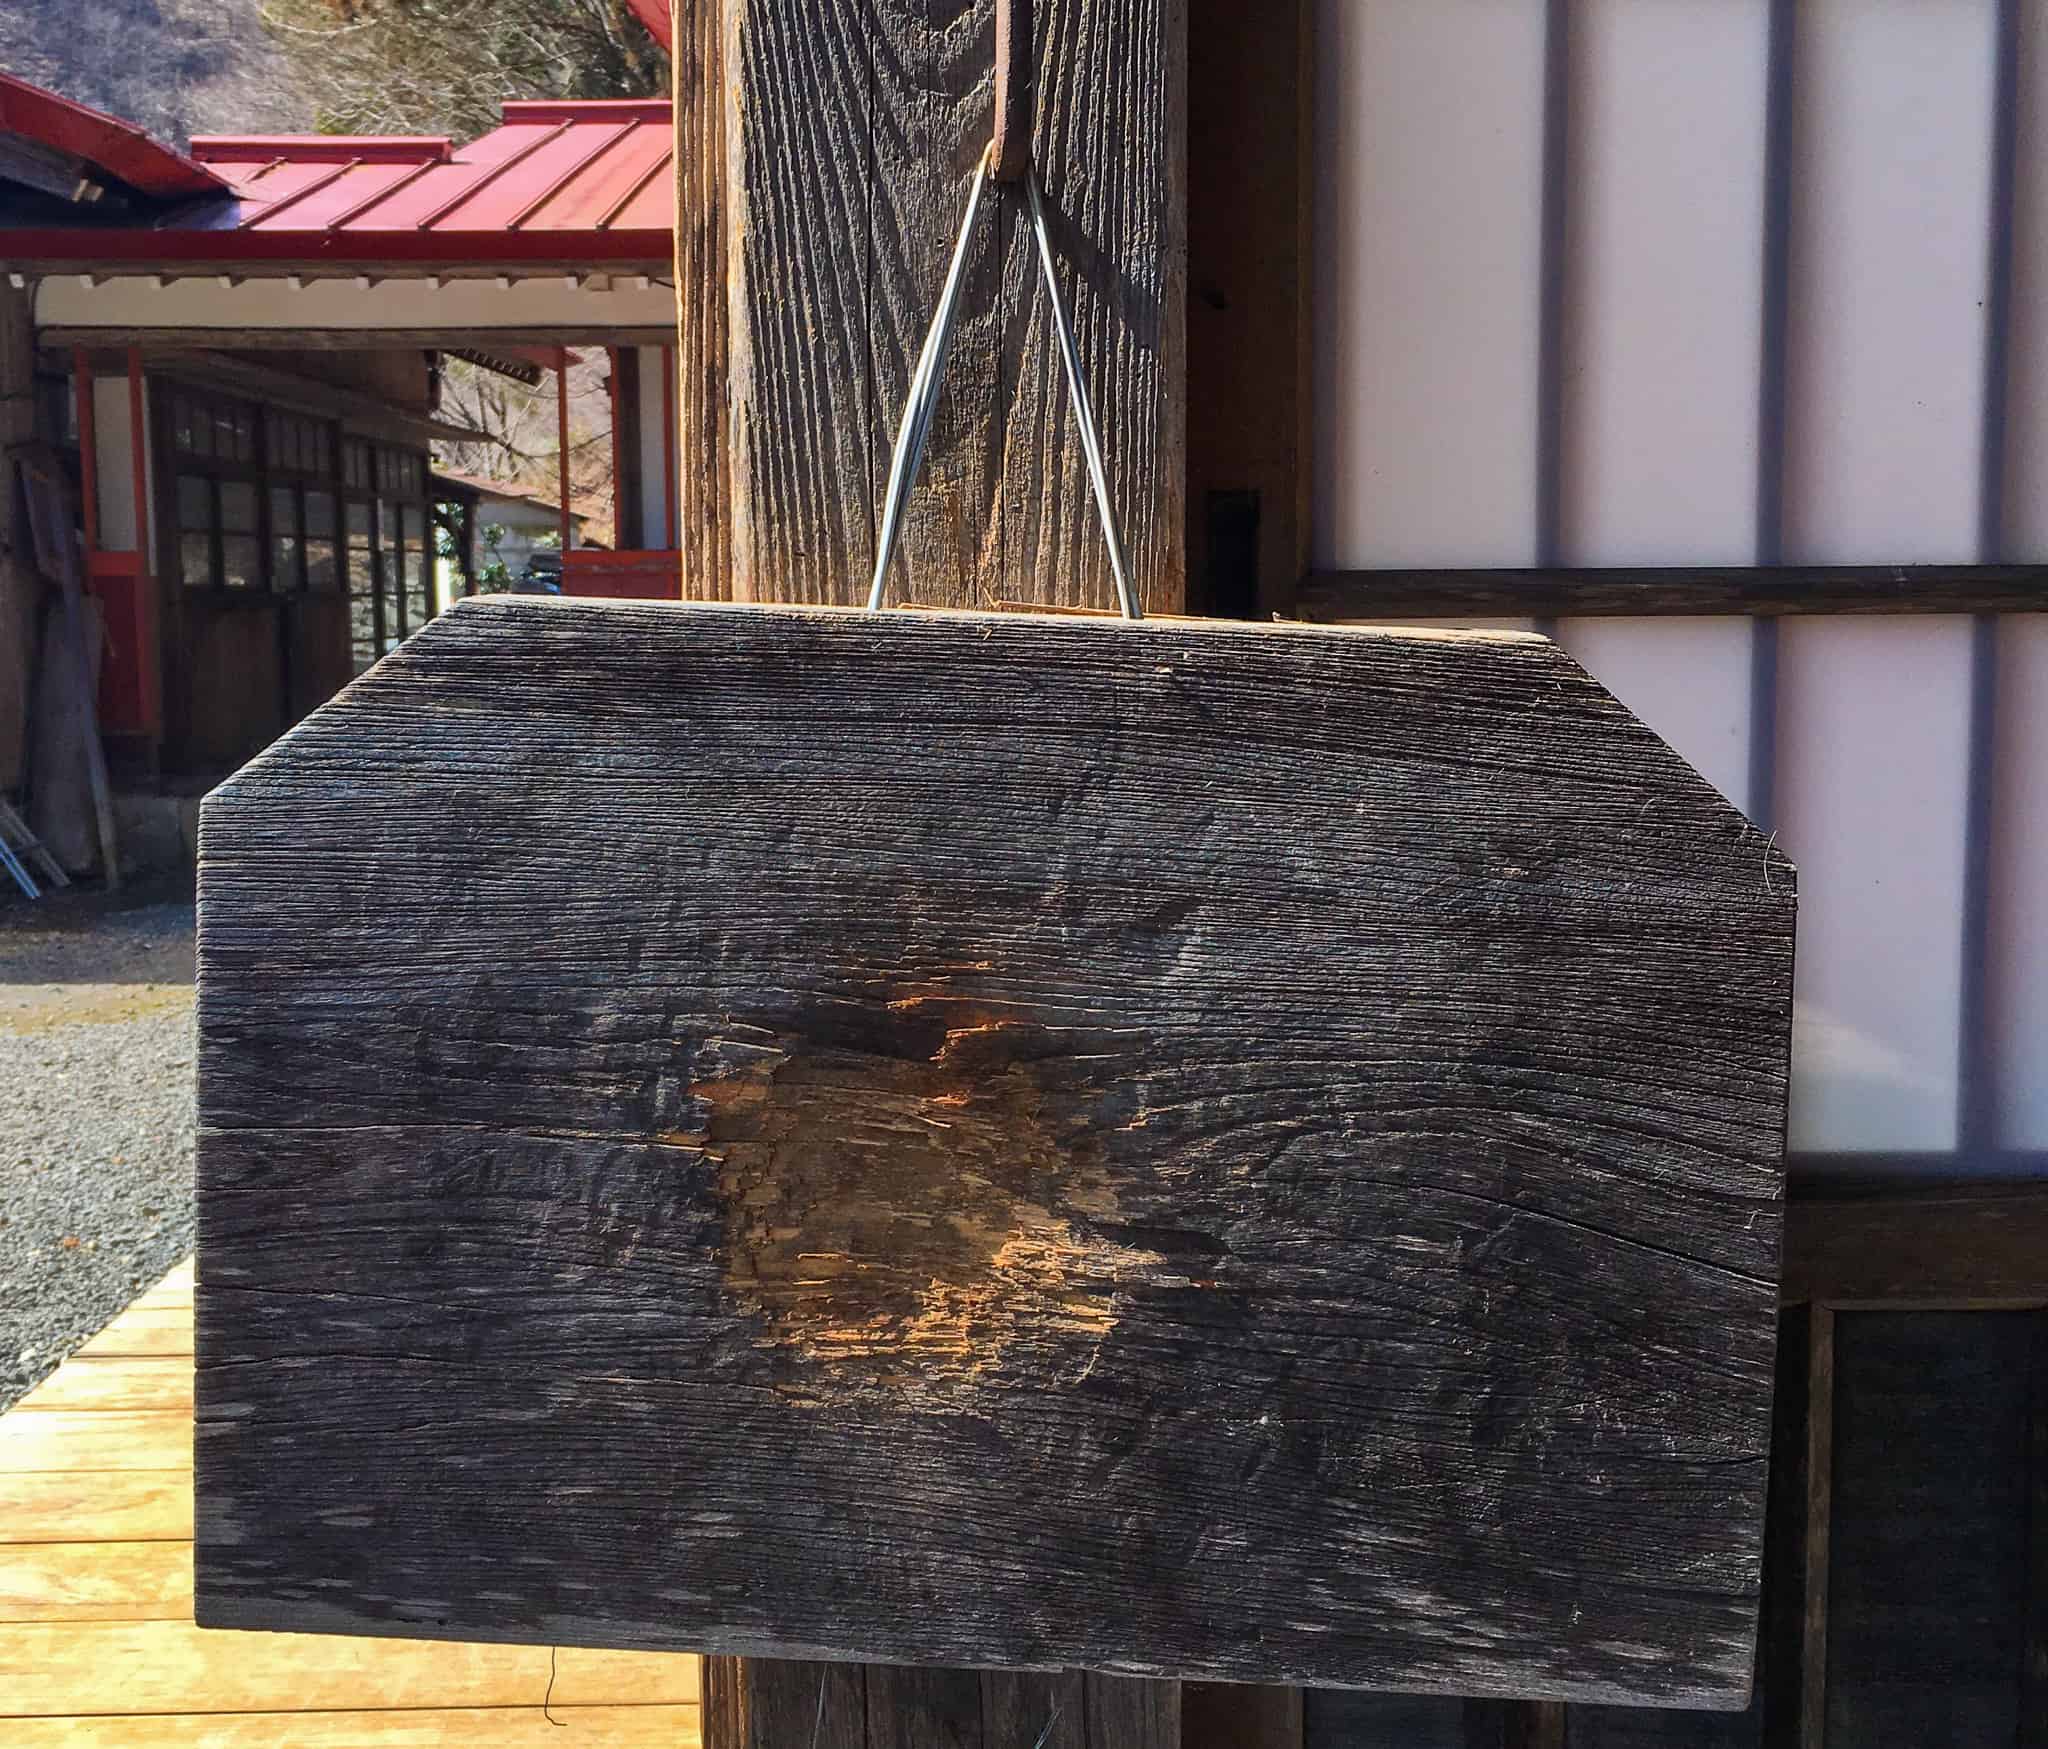 This wooden gong is what Asami uses to announce every meal at Taiyoji Temple